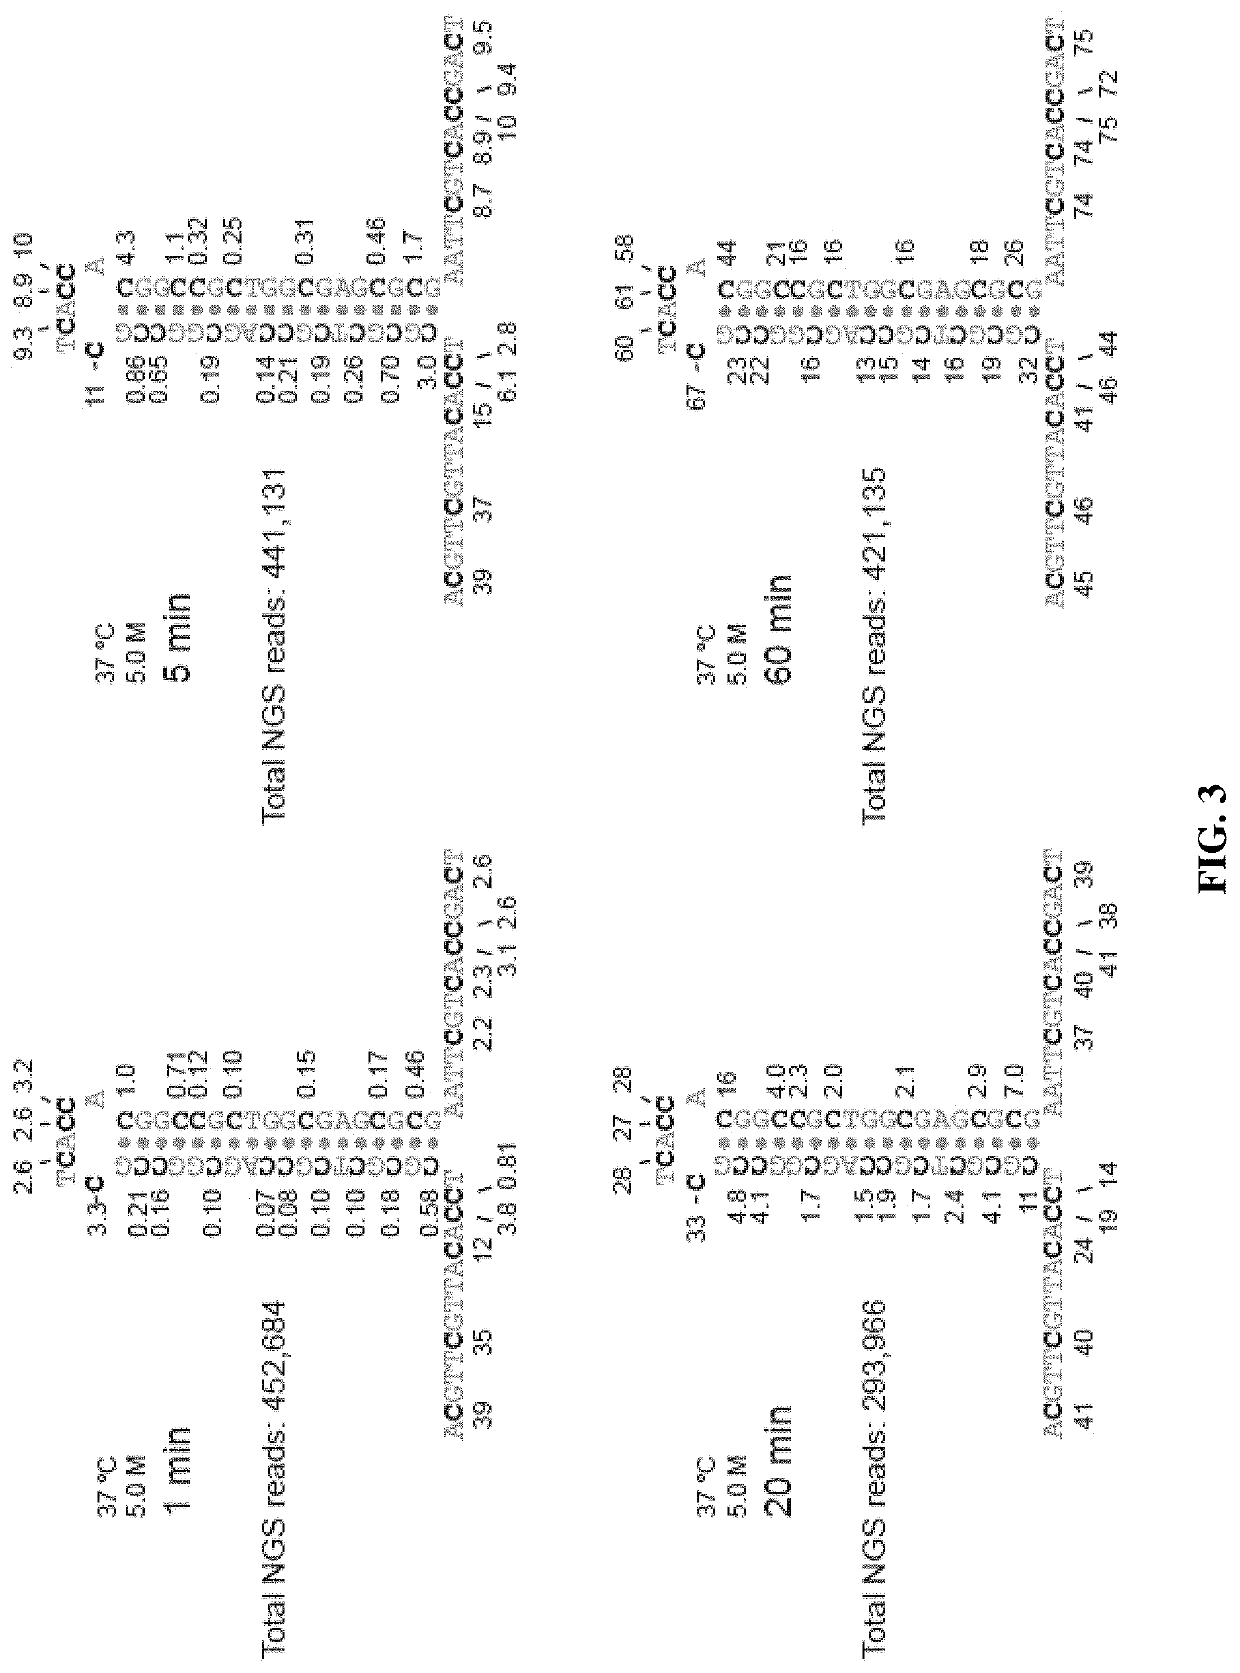 Methods for studying nucleotide accessibility in DNA and RNA based on low-yield bisulfite conversion and next-generation sequencing